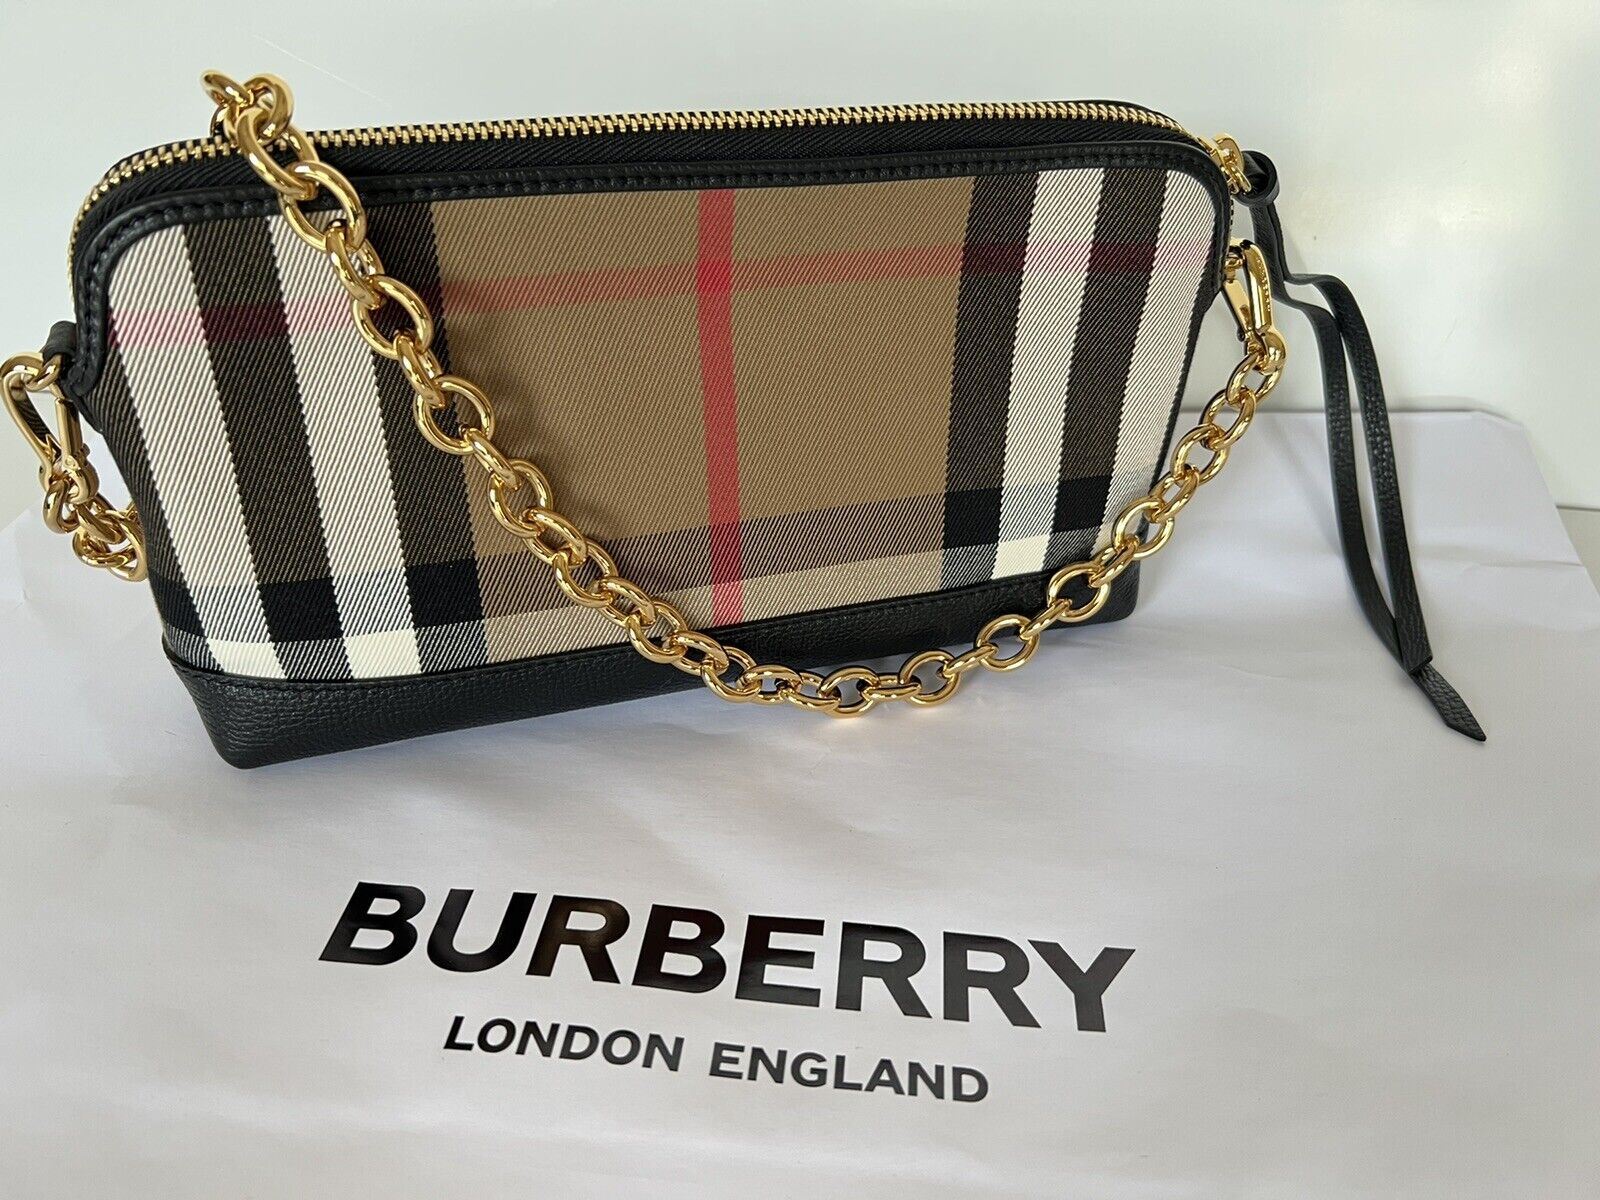 NWT Burberry Abingdon House Check Derby Leather Shoulder Bag Black 4014741 Italy